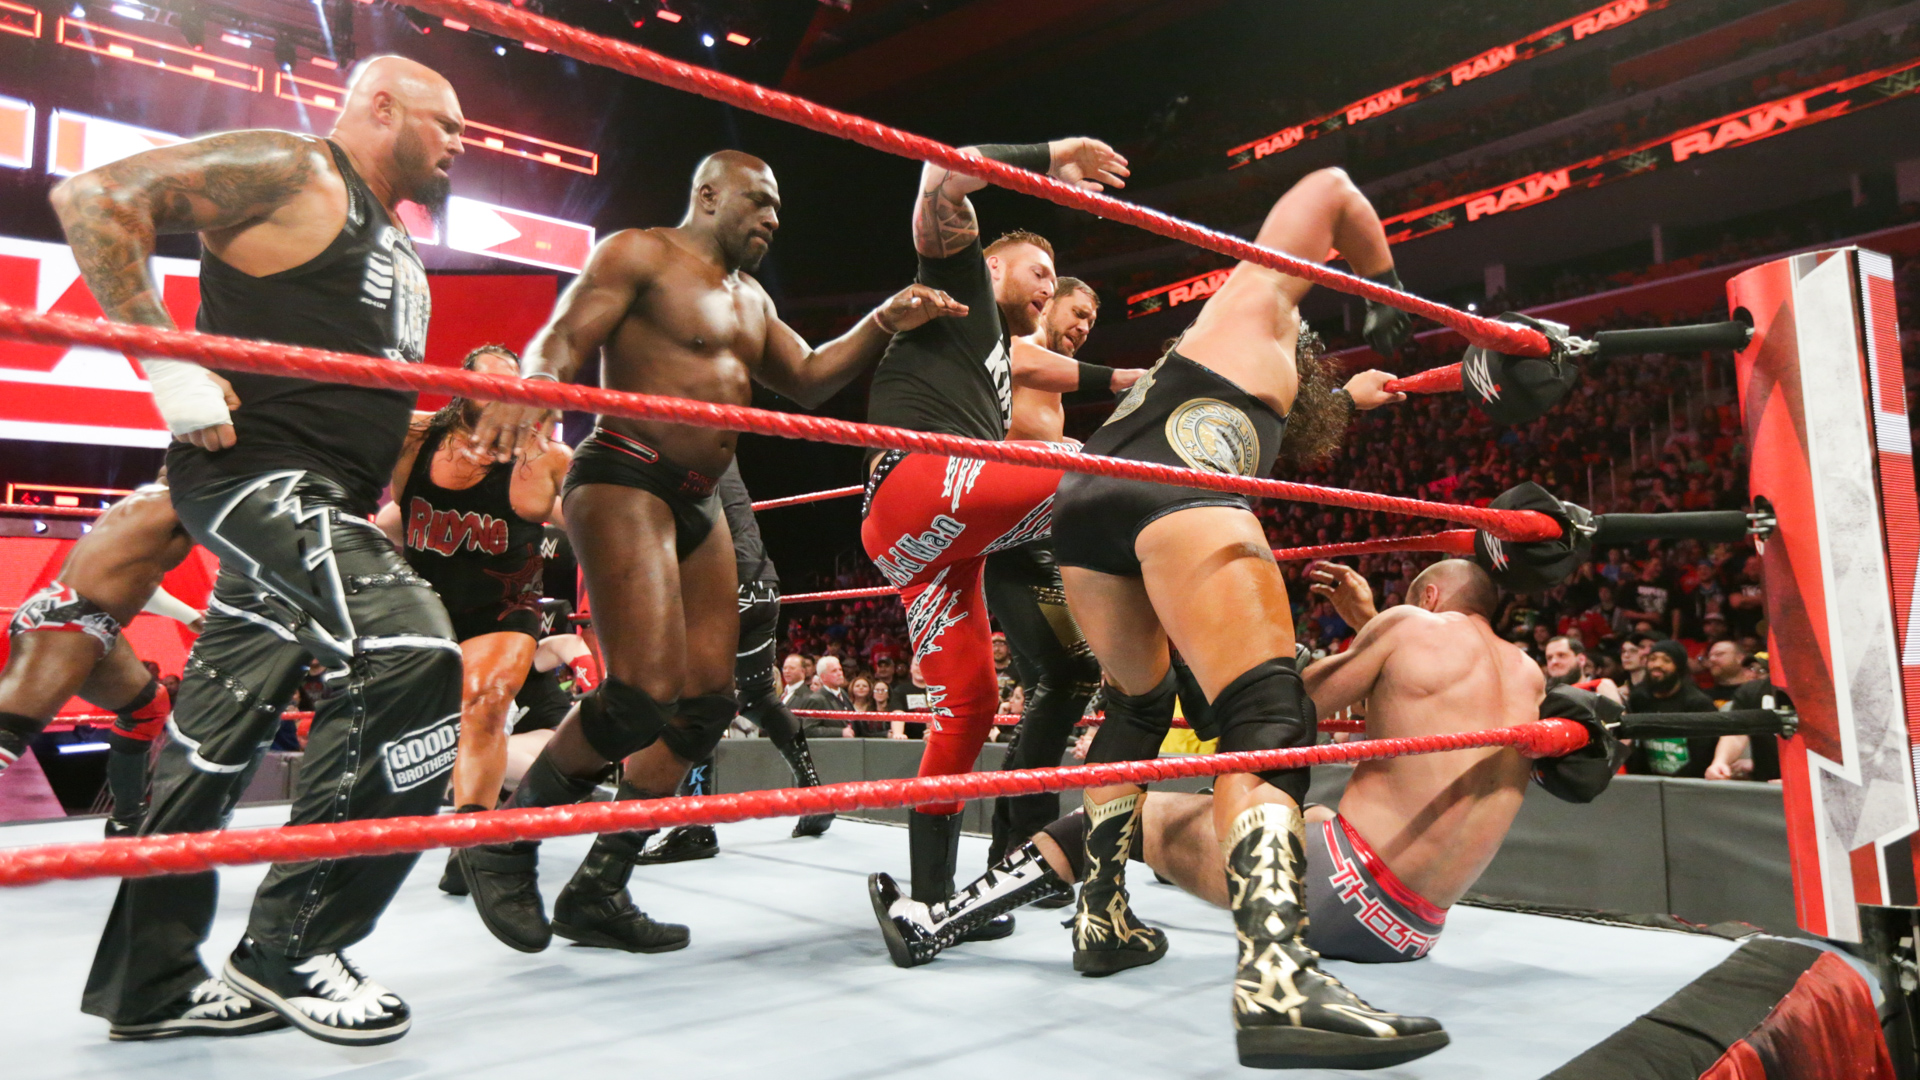 The Raw Tag Team division attacked Raw Tag Team Champions Cesaro & Sheamus